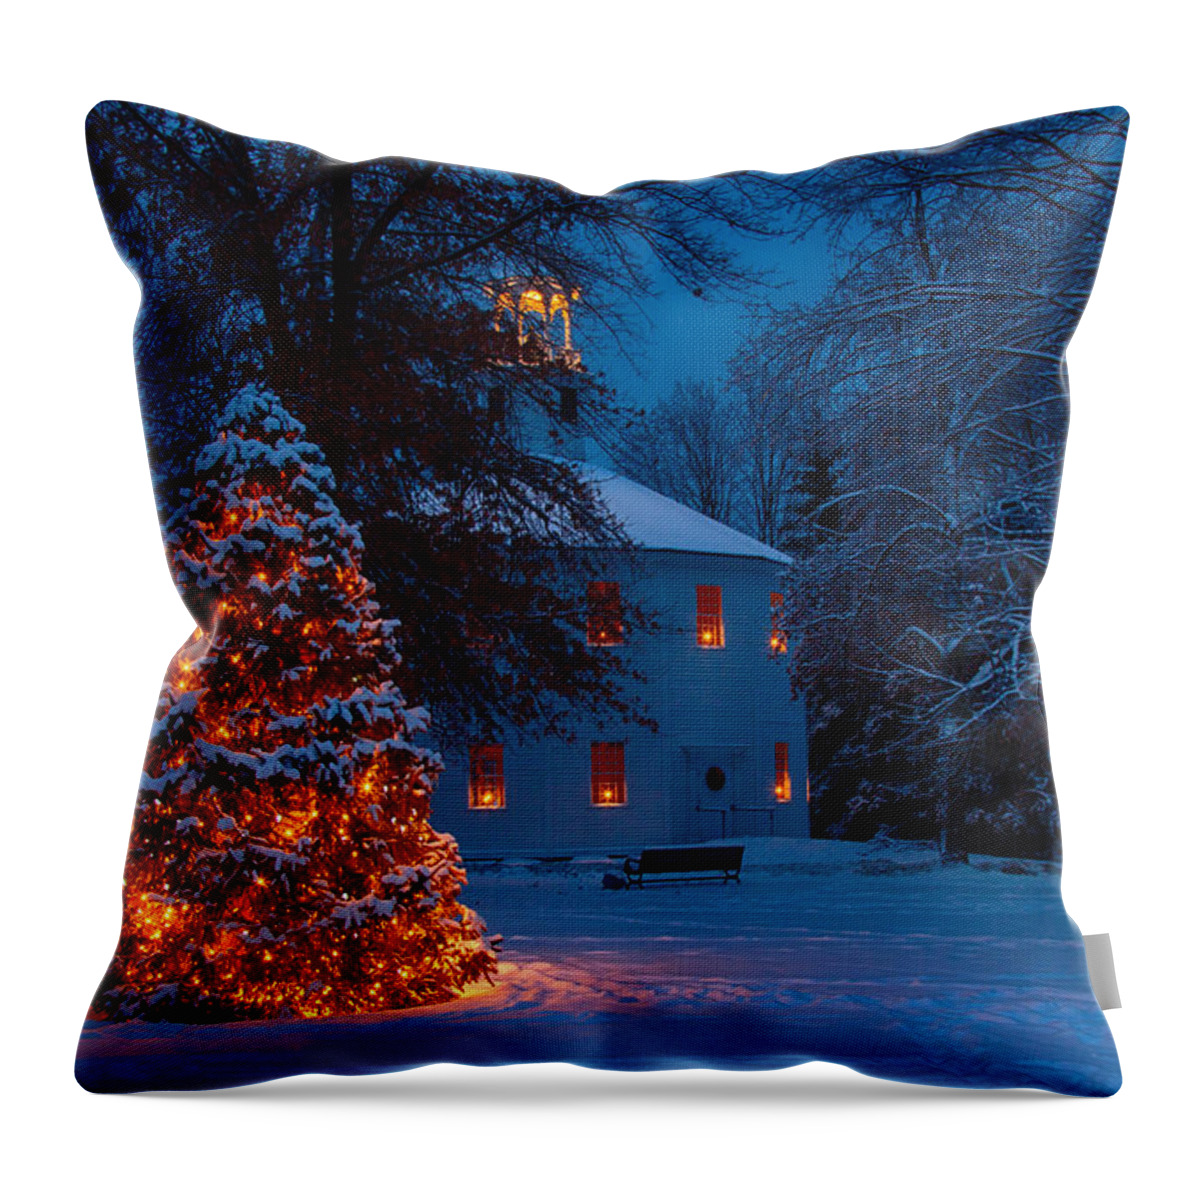 Round Church Throw Pillow featuring the photograph Christmas at the Richmond round church by Jeff Folger